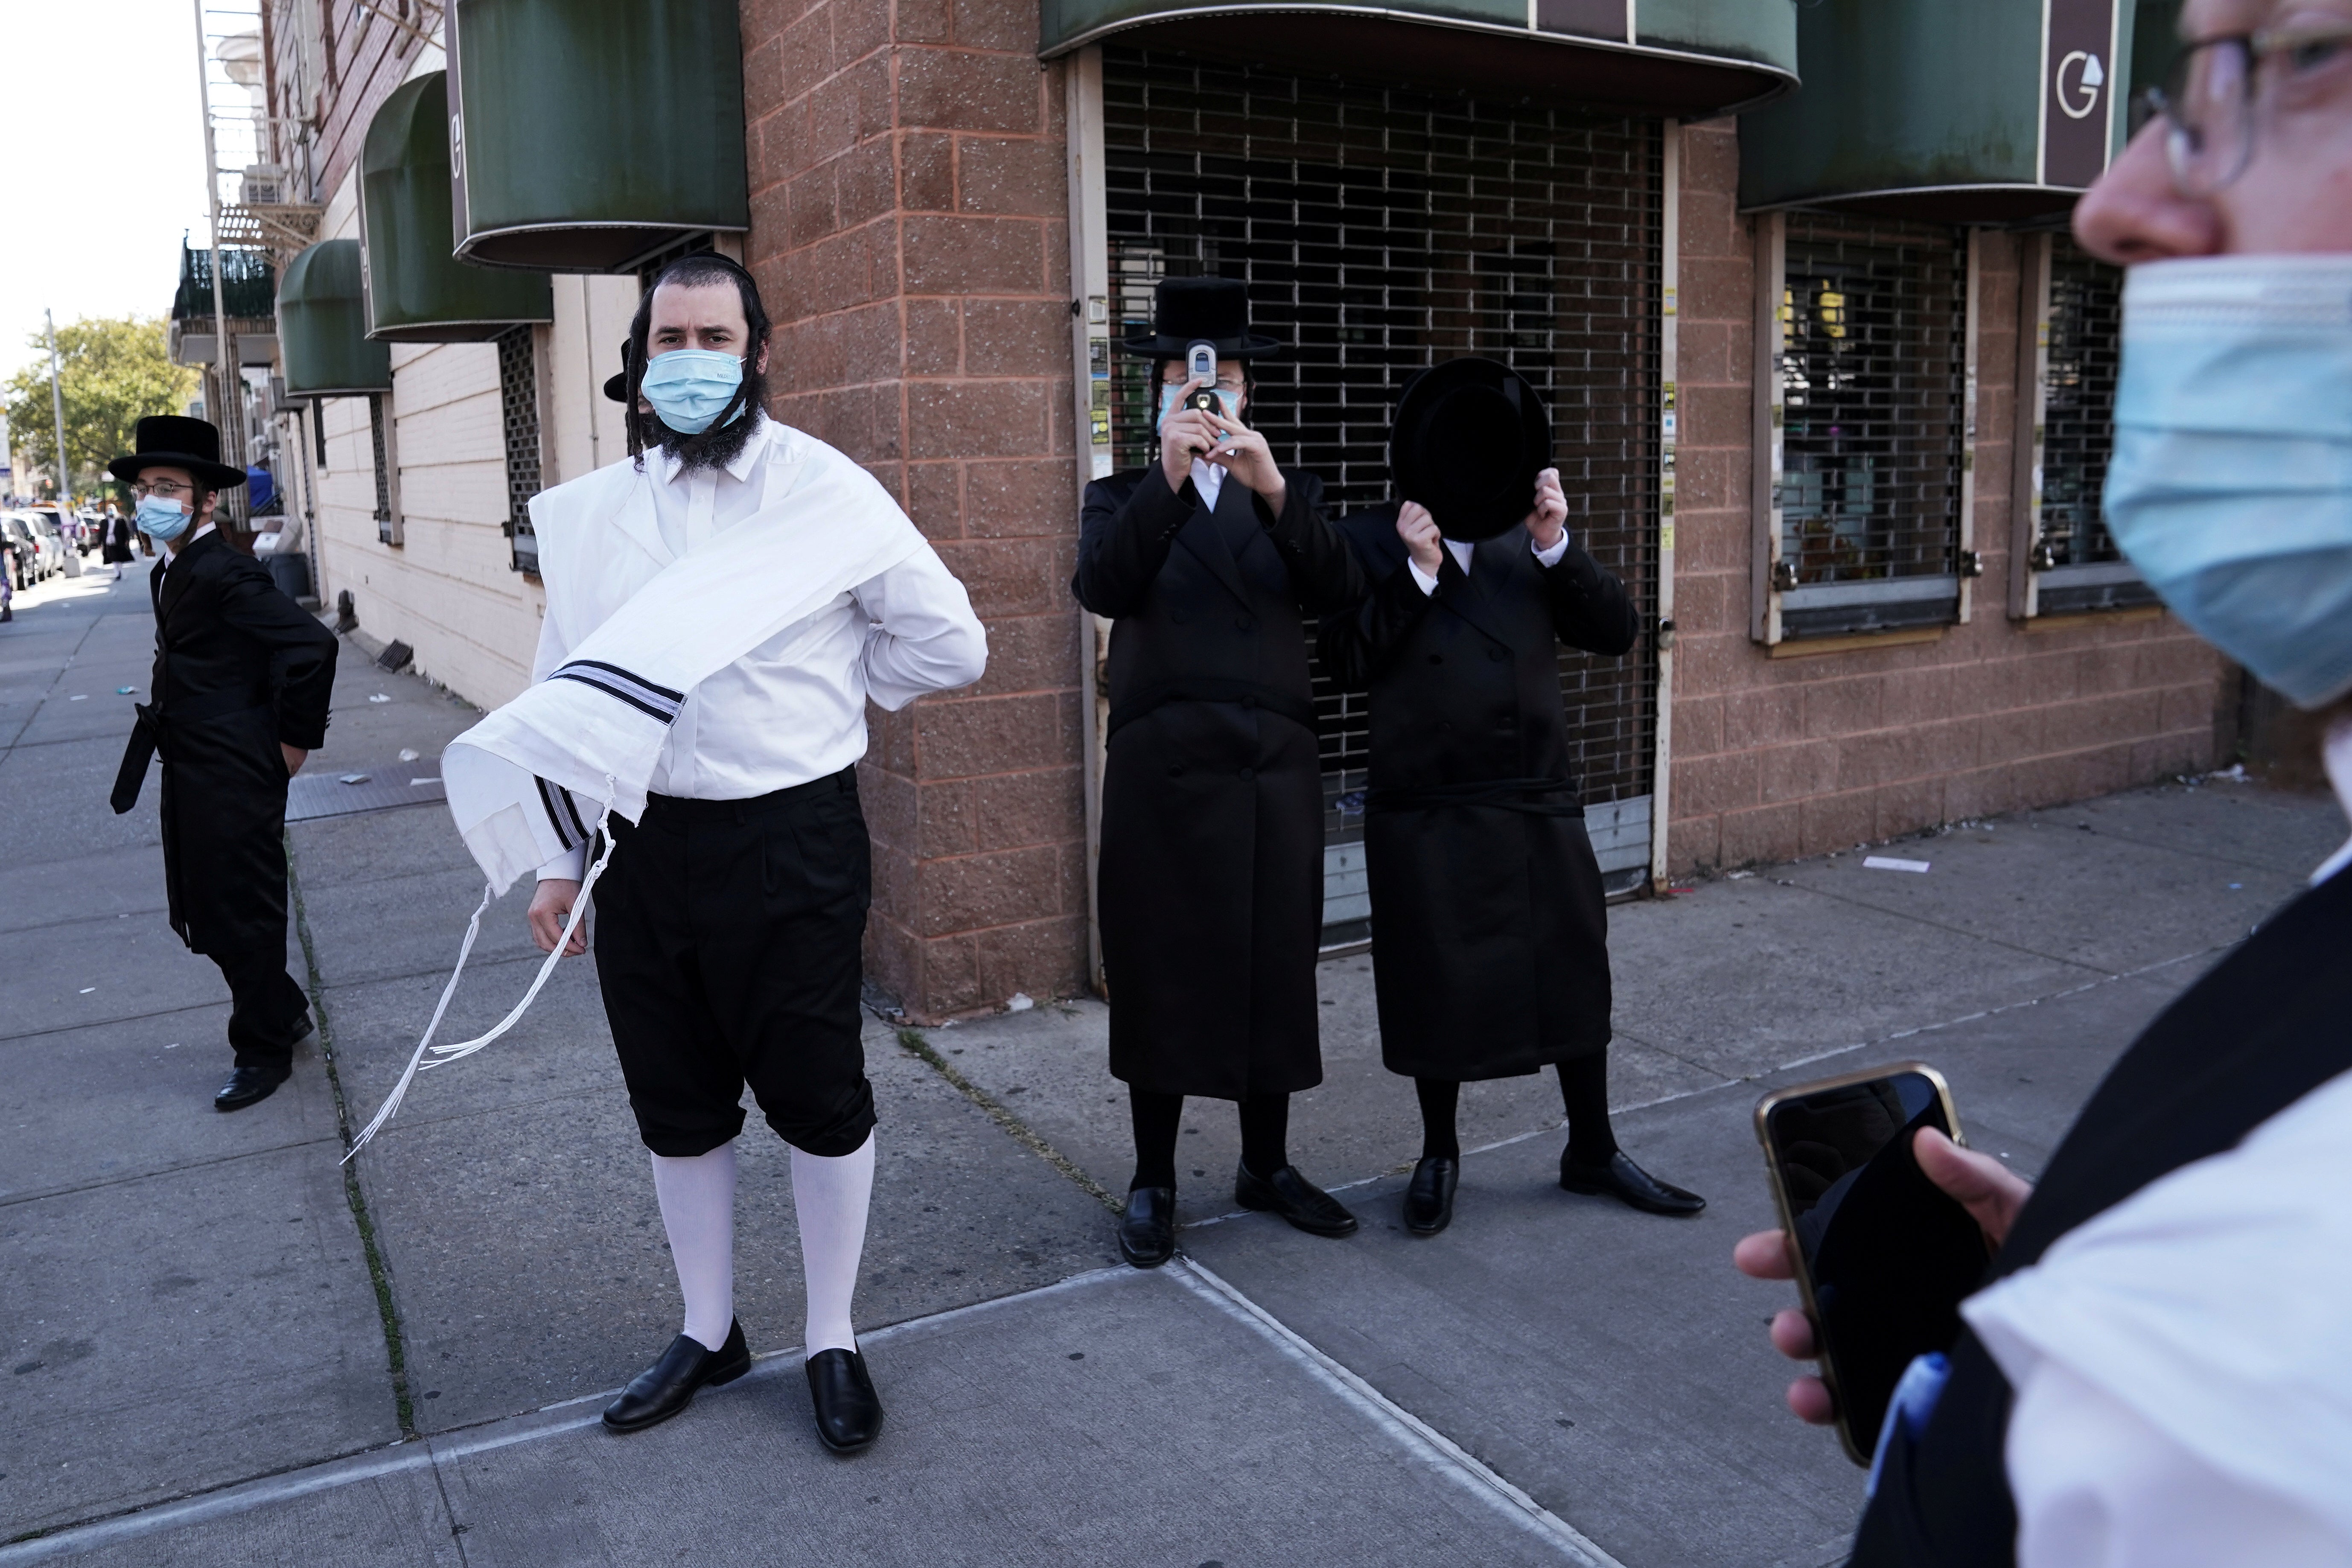 Ultra-Orthodox Jewish men surround and taunt a photographer during the coronavirus disease (COVID-19) pandemic in the Borough Park section of the Brooklyn borough of New York City.